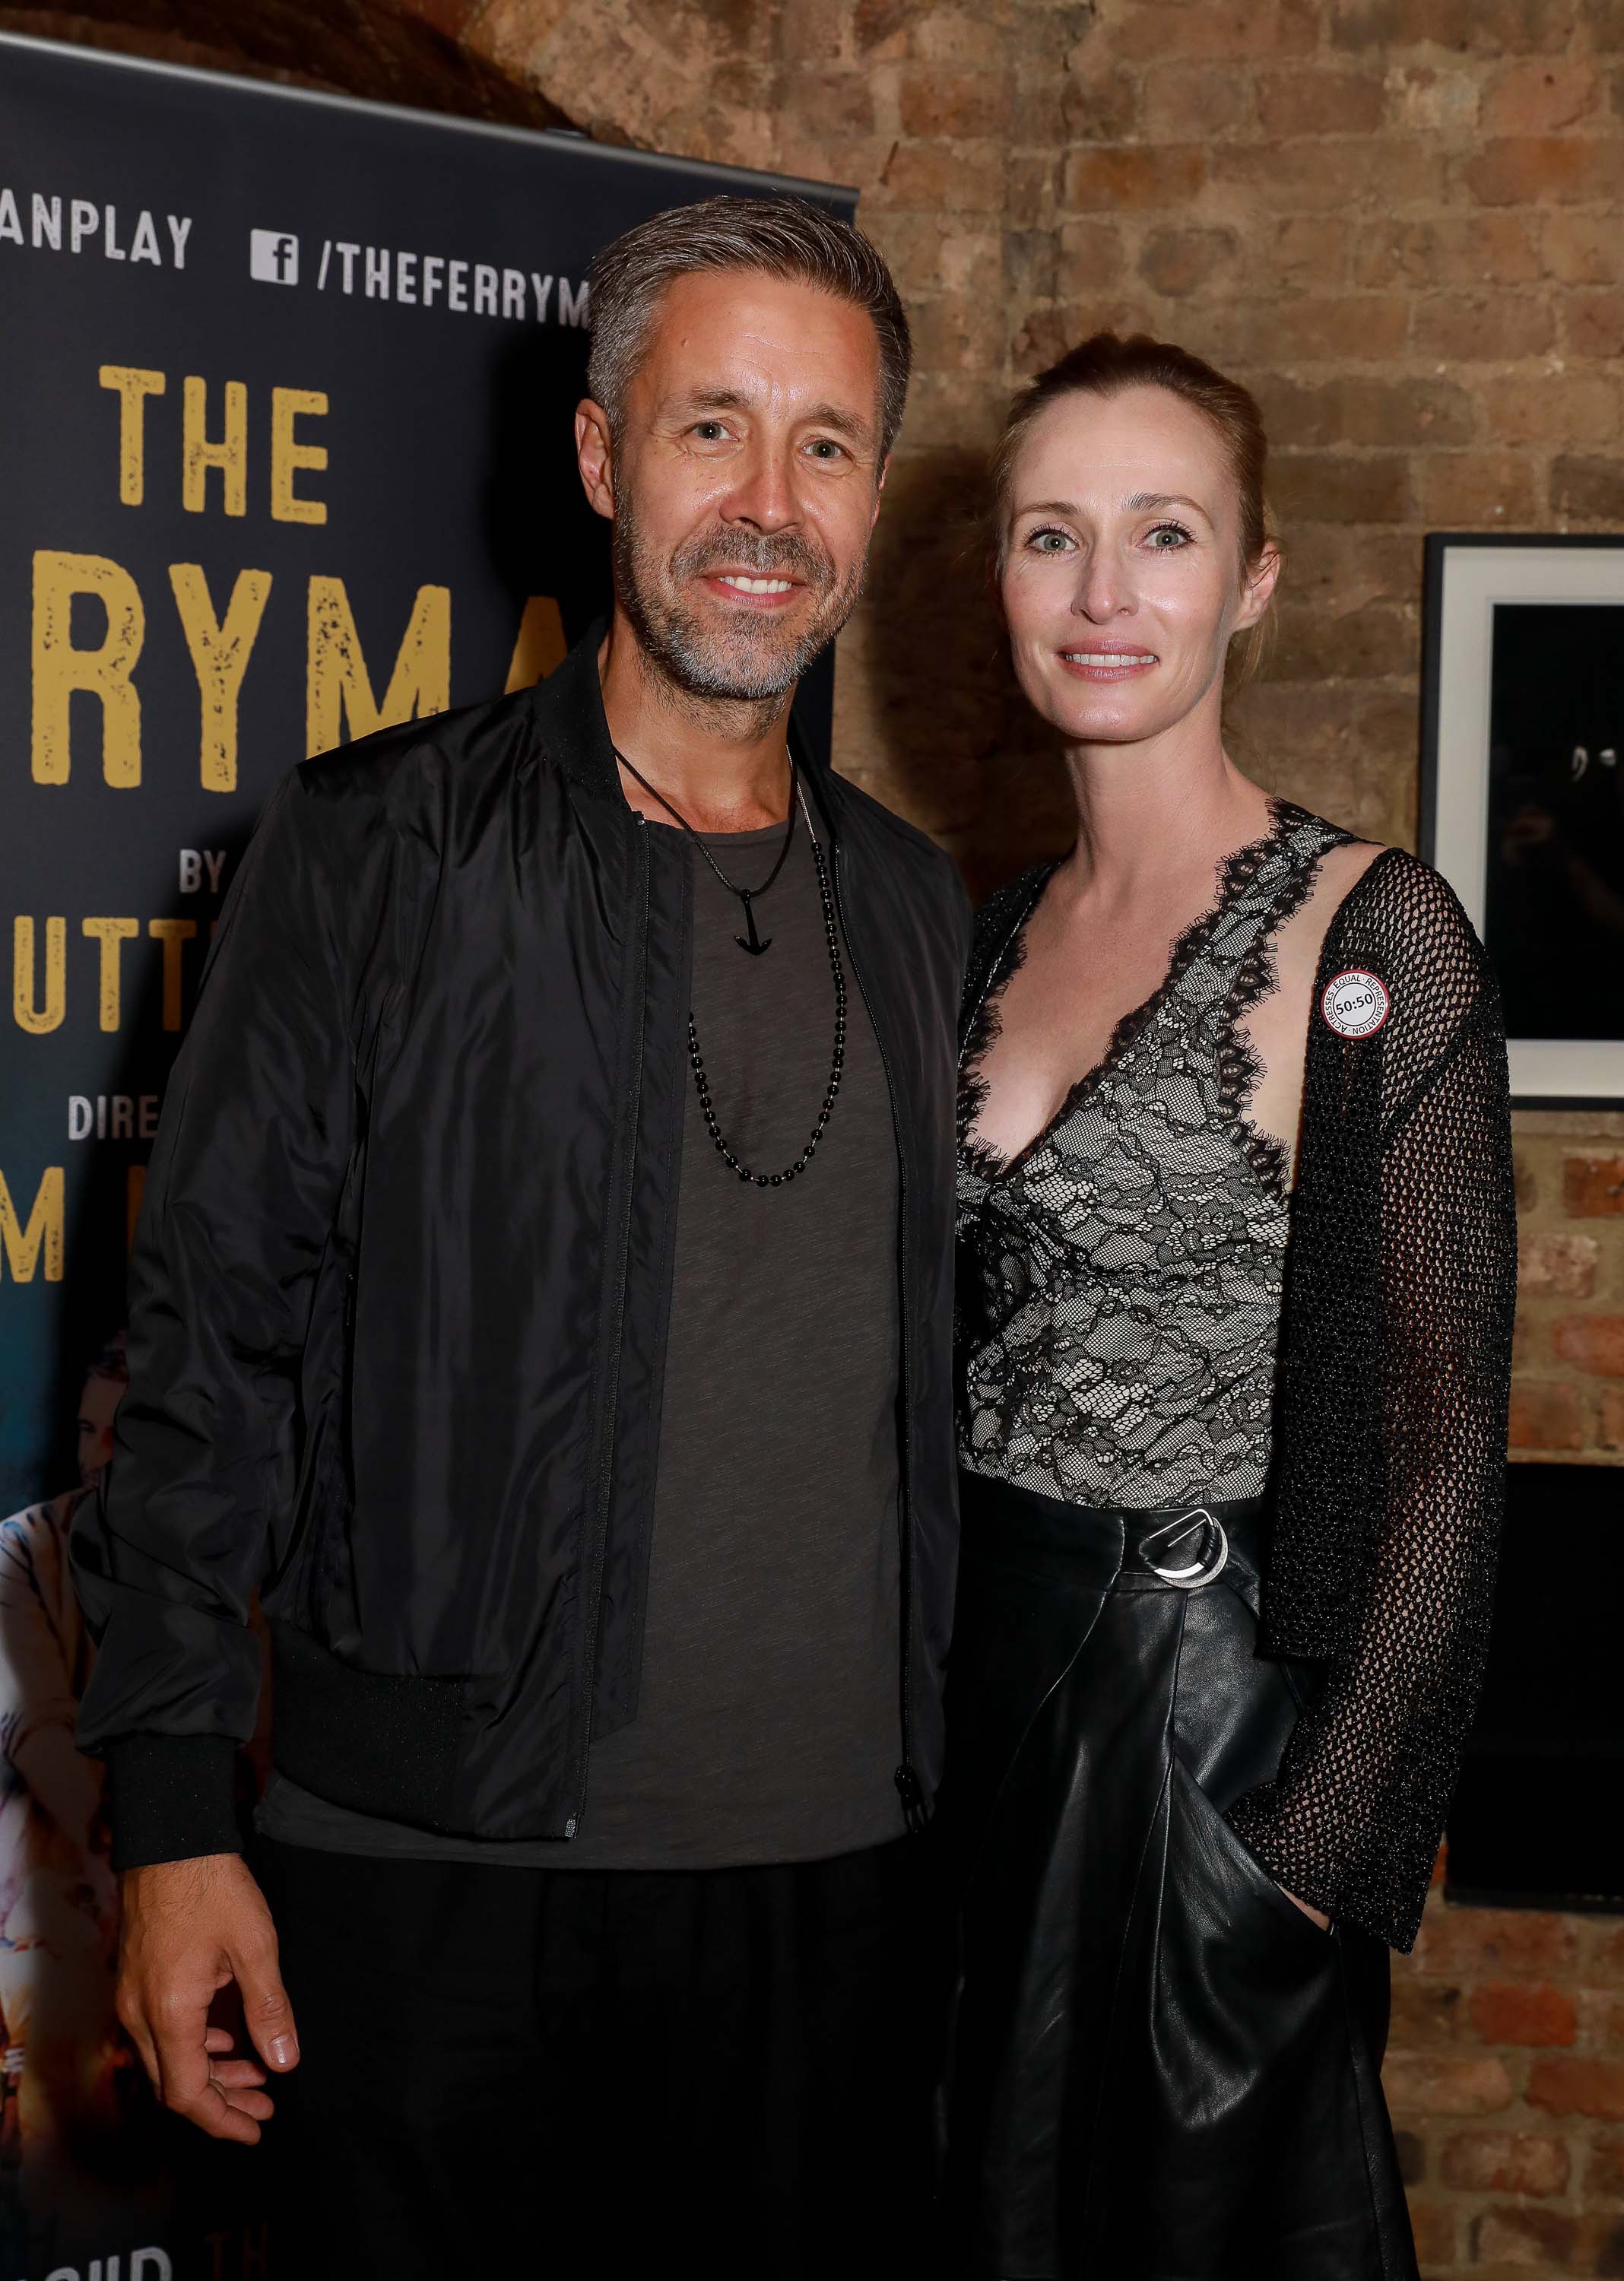 Genevieve O’Reilly attends The Ferryman play